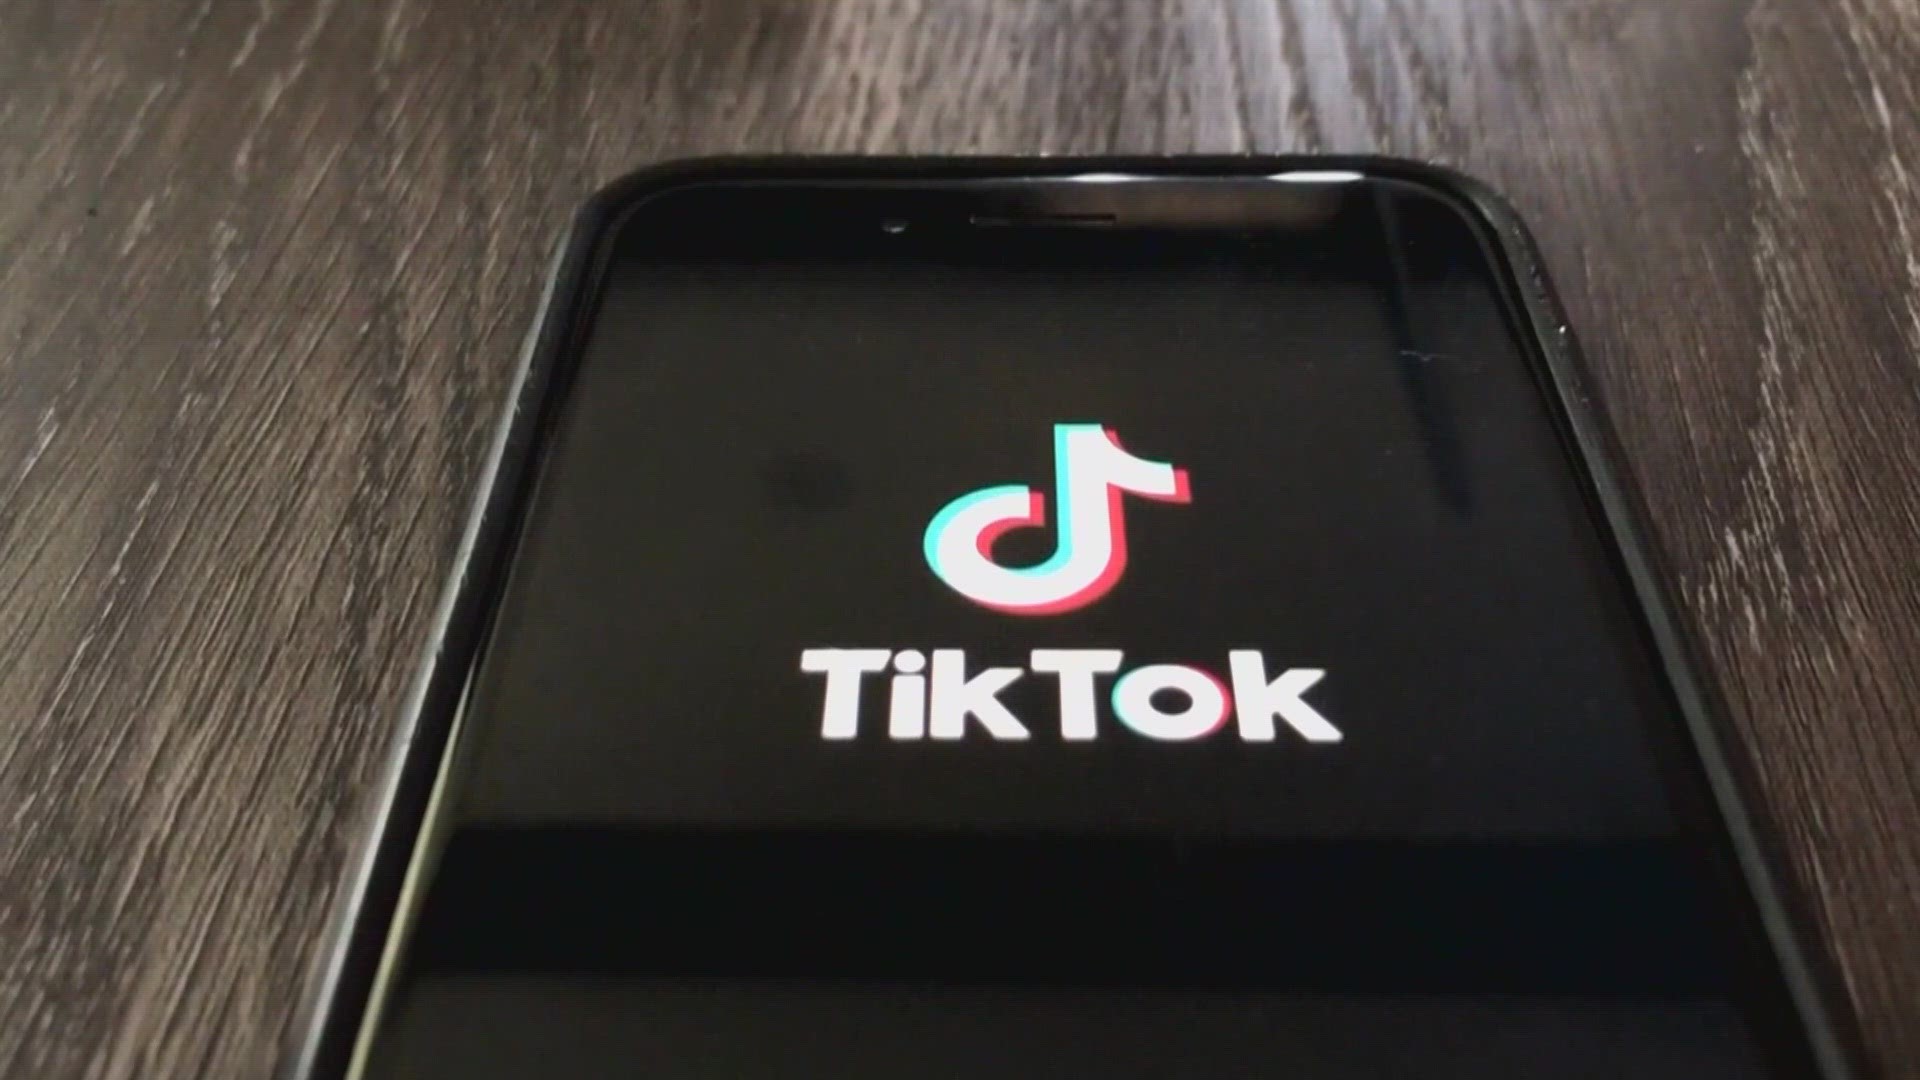 Arkansas governor orders TikTok be banned from state devices